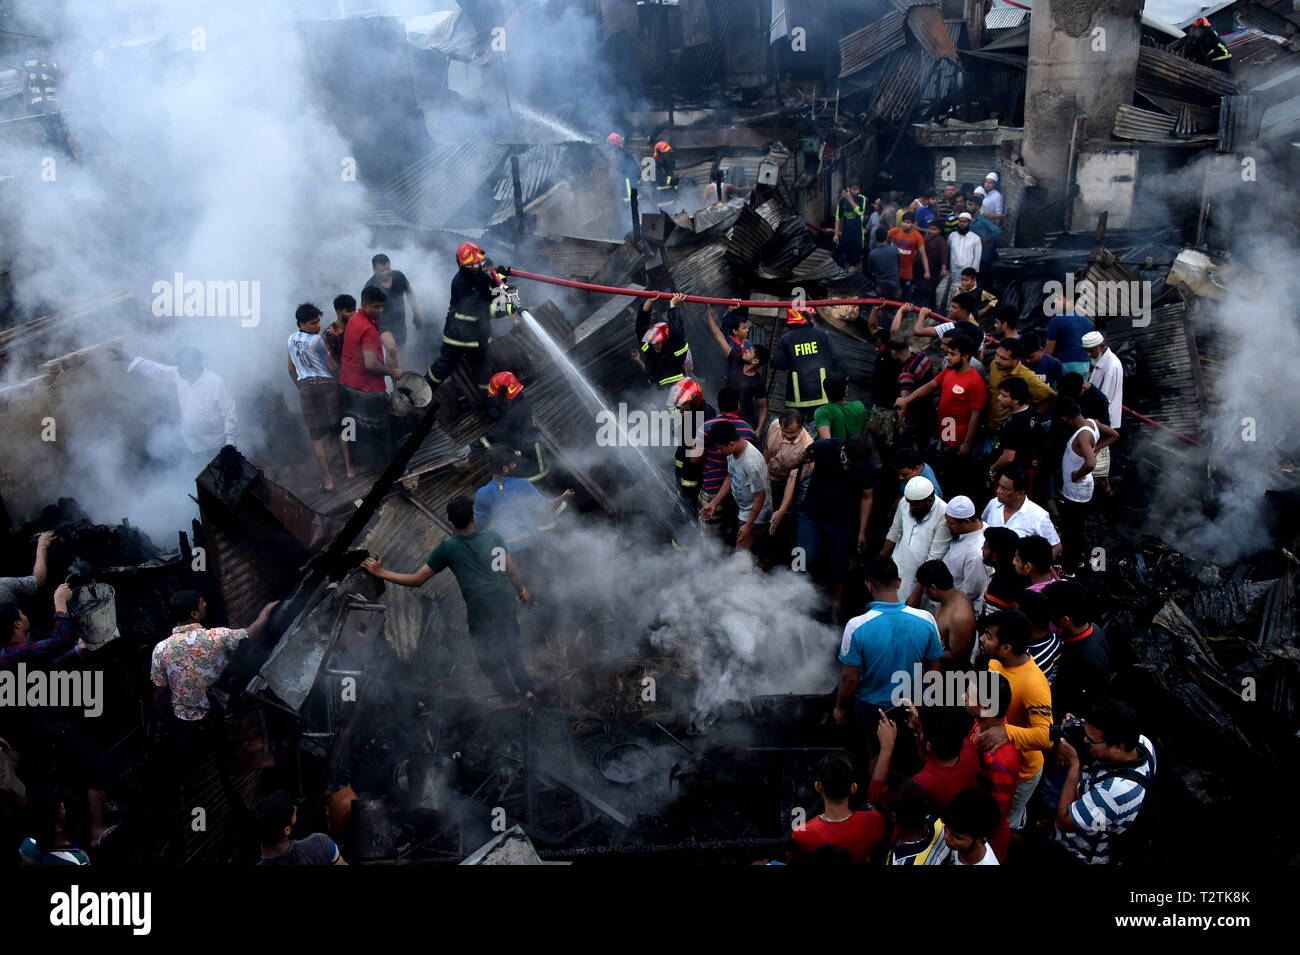 Dhaka, Bangladesh. 4th Apr, 2019. Firefighters spray water to douse flame after a fire broke out at a kitchen market in Dhaka, Bangladesh, April 4, 2019. An early morning fire gutted dozens of shops in a kitchen market in Bangladesh capital Dhaka on Thursday, Kazi Nazmuzzaman, deputy assistant director of Fire Service and Civil Defense, told Xinhua. Credit: Stringer/Xinhua/Alamy Live News Stock Photo